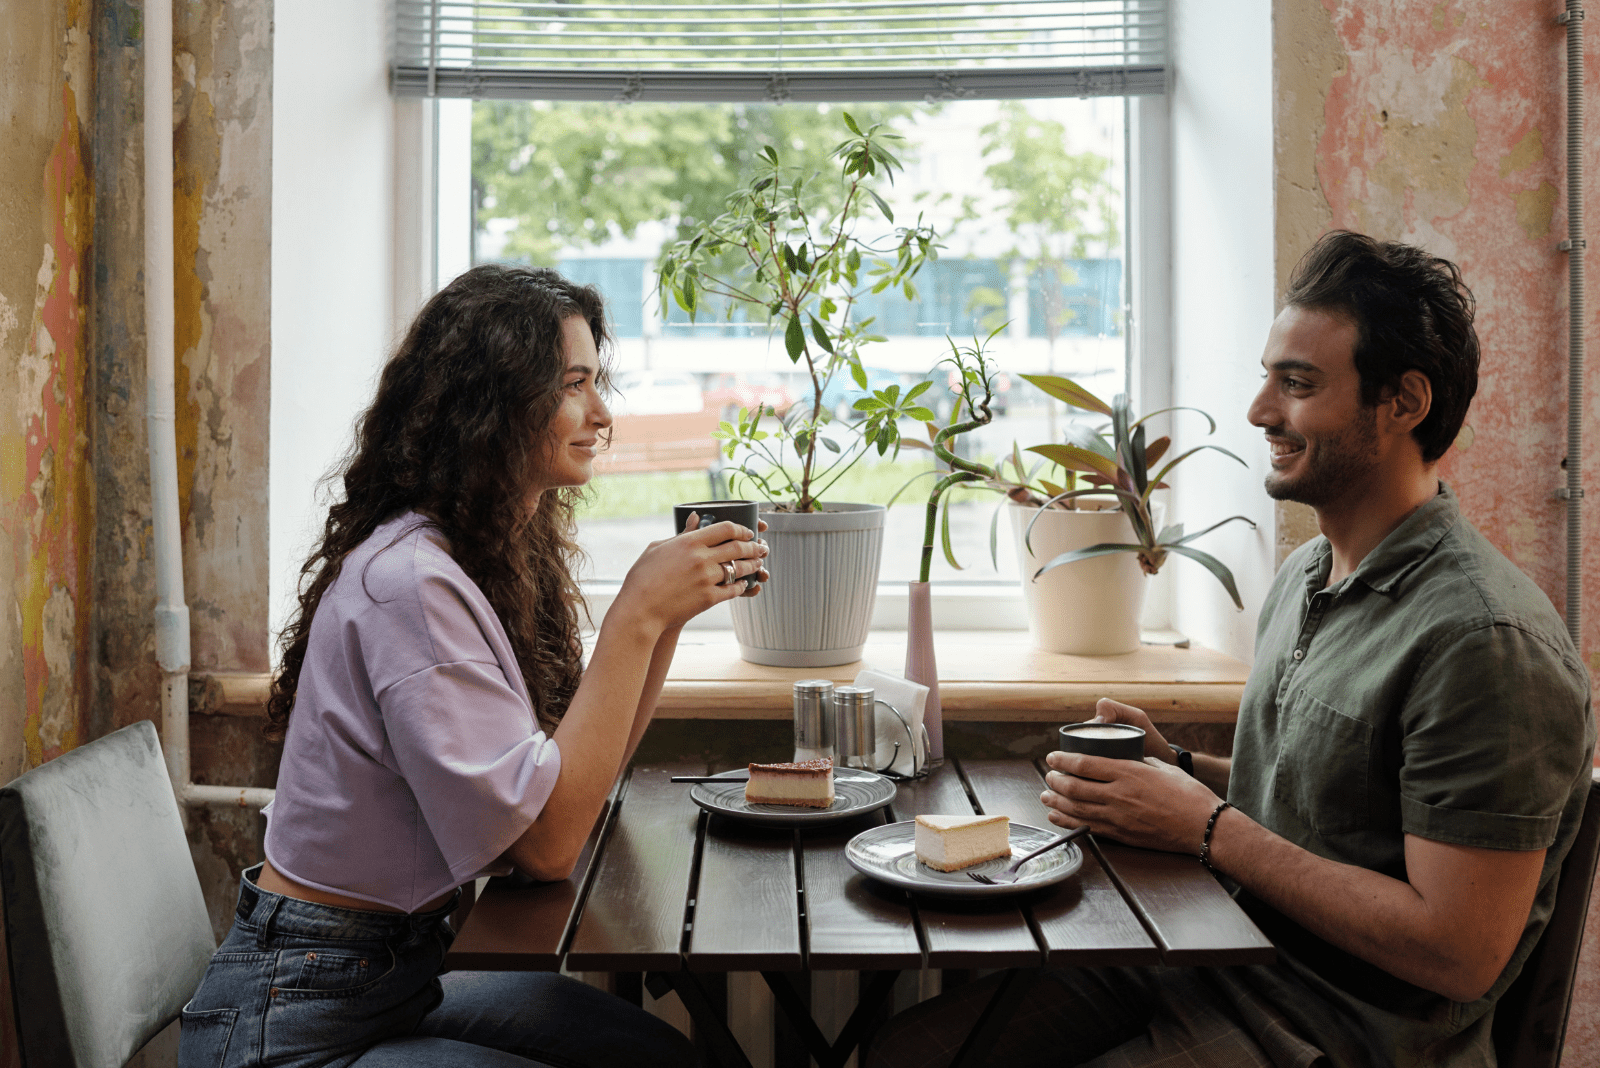 A handsome man and woman are sitting in a cafe